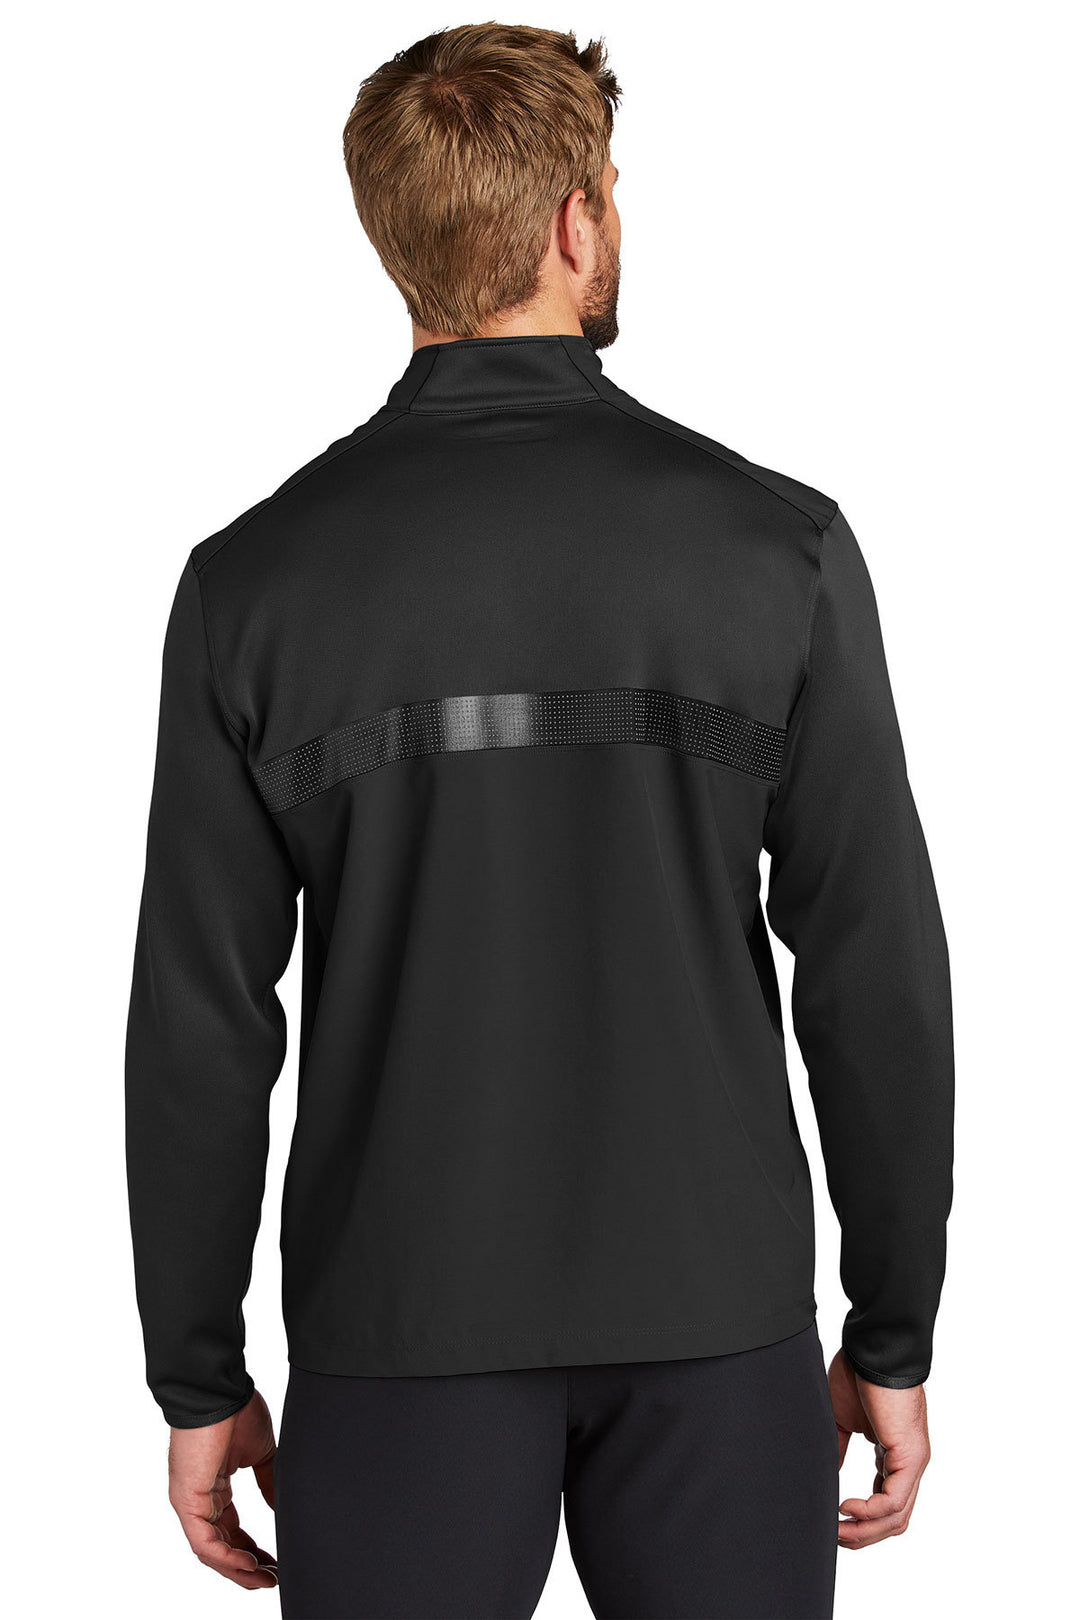 Dri-FIT Fabric Mix 1/2-Zip Cover-Up